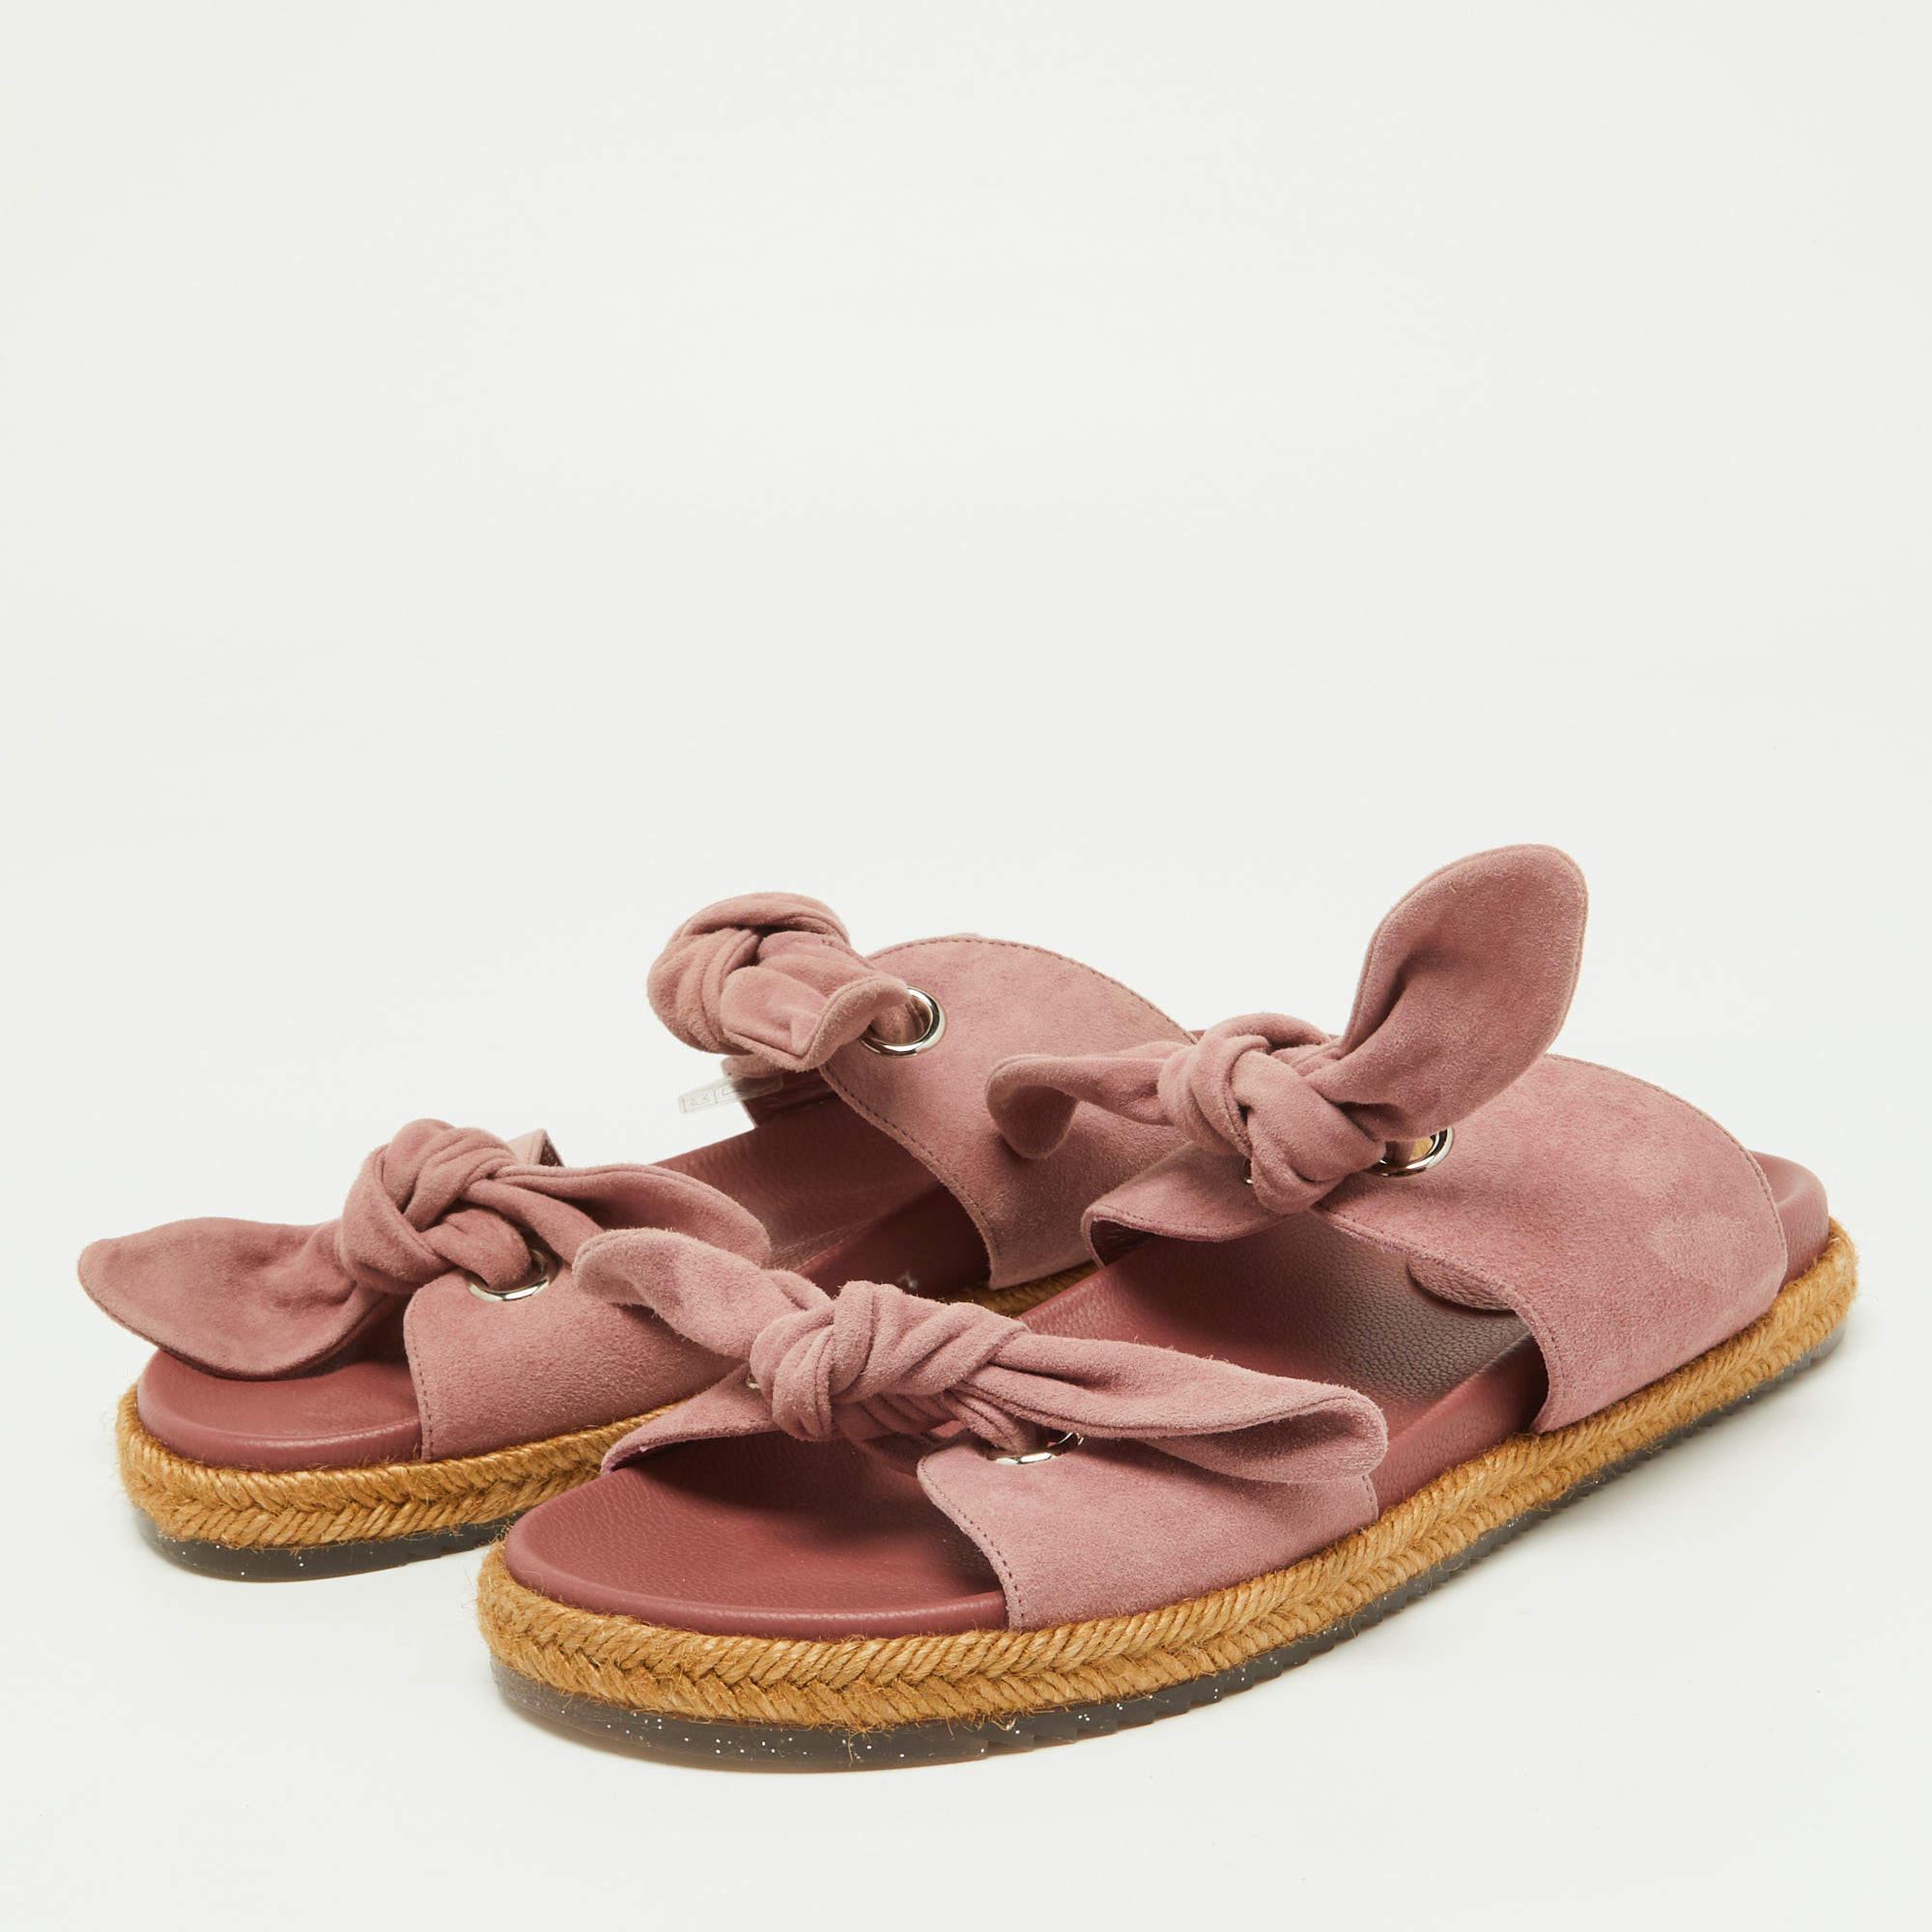 Jimmy Choo Pink Suede Bow Flat Slides Size 38 In Good Condition For Sale In Dubai, Al Qouz 2